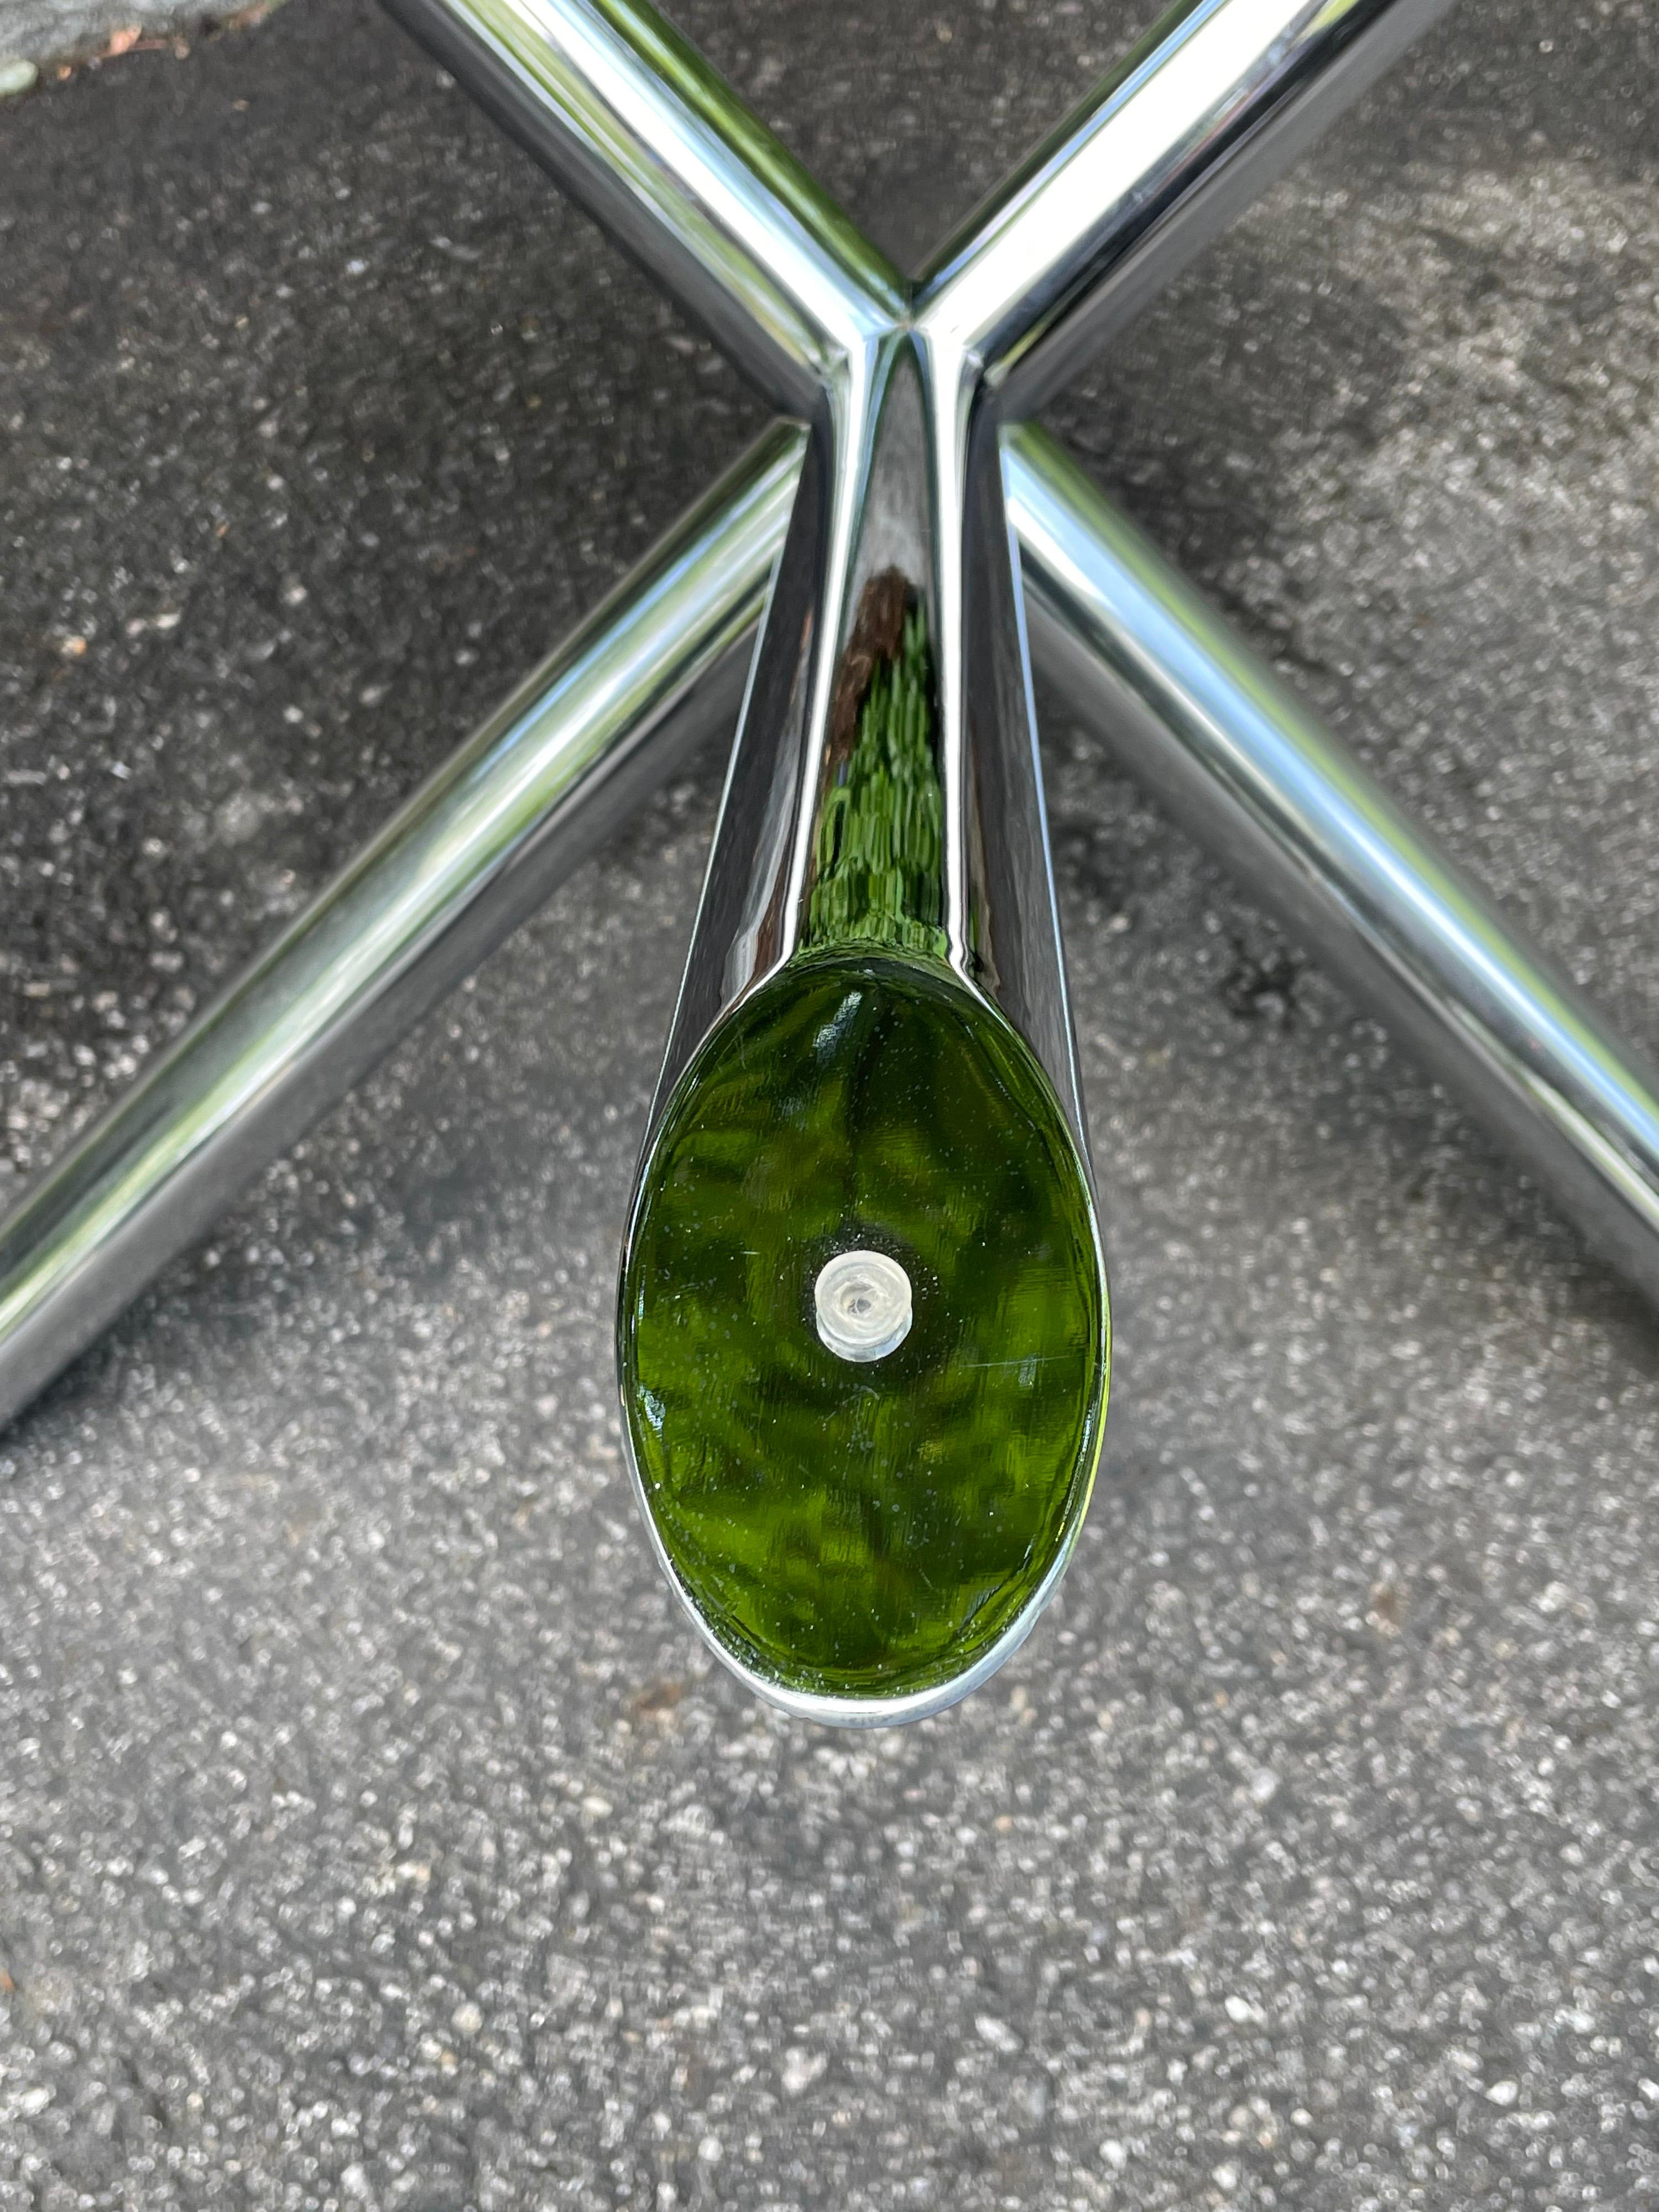 Mid Century Modern Tubular Chrome X Base Dining Table with New Round Glass Top In Good Condition For Sale In Bedford Hills, NY